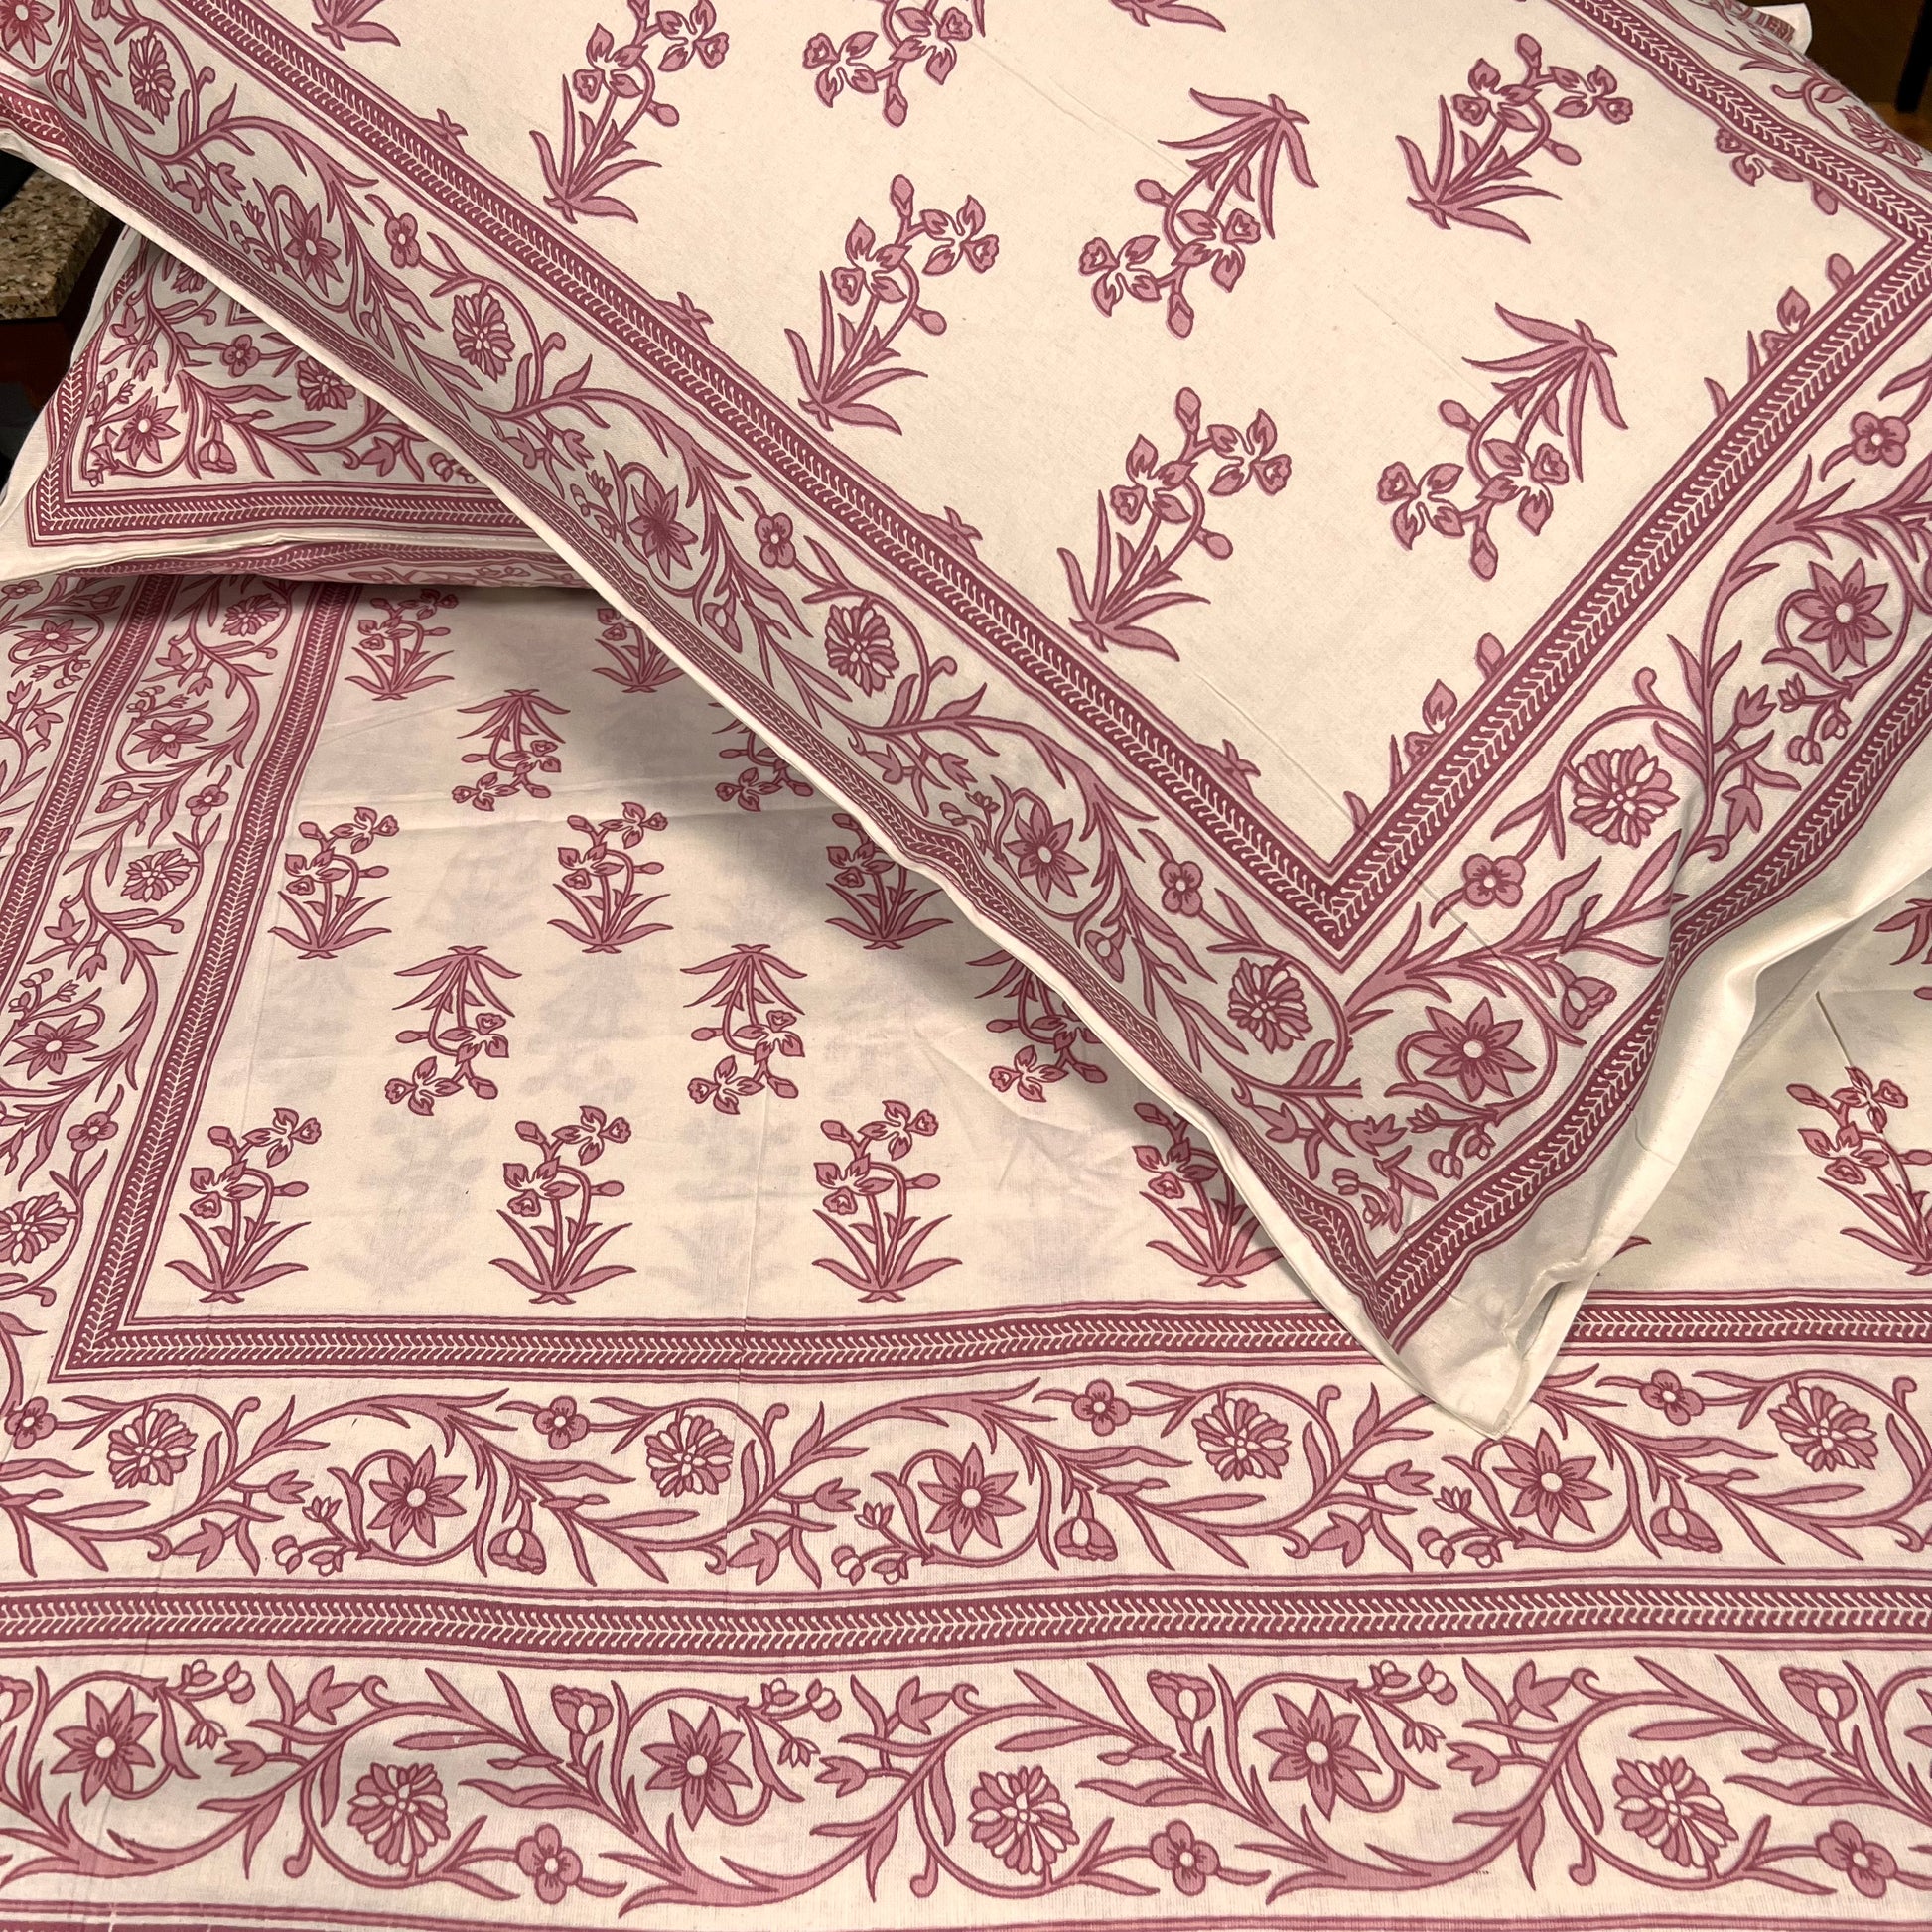 Handmade Printed Cotton Double Bedsheet With Floral Pattern